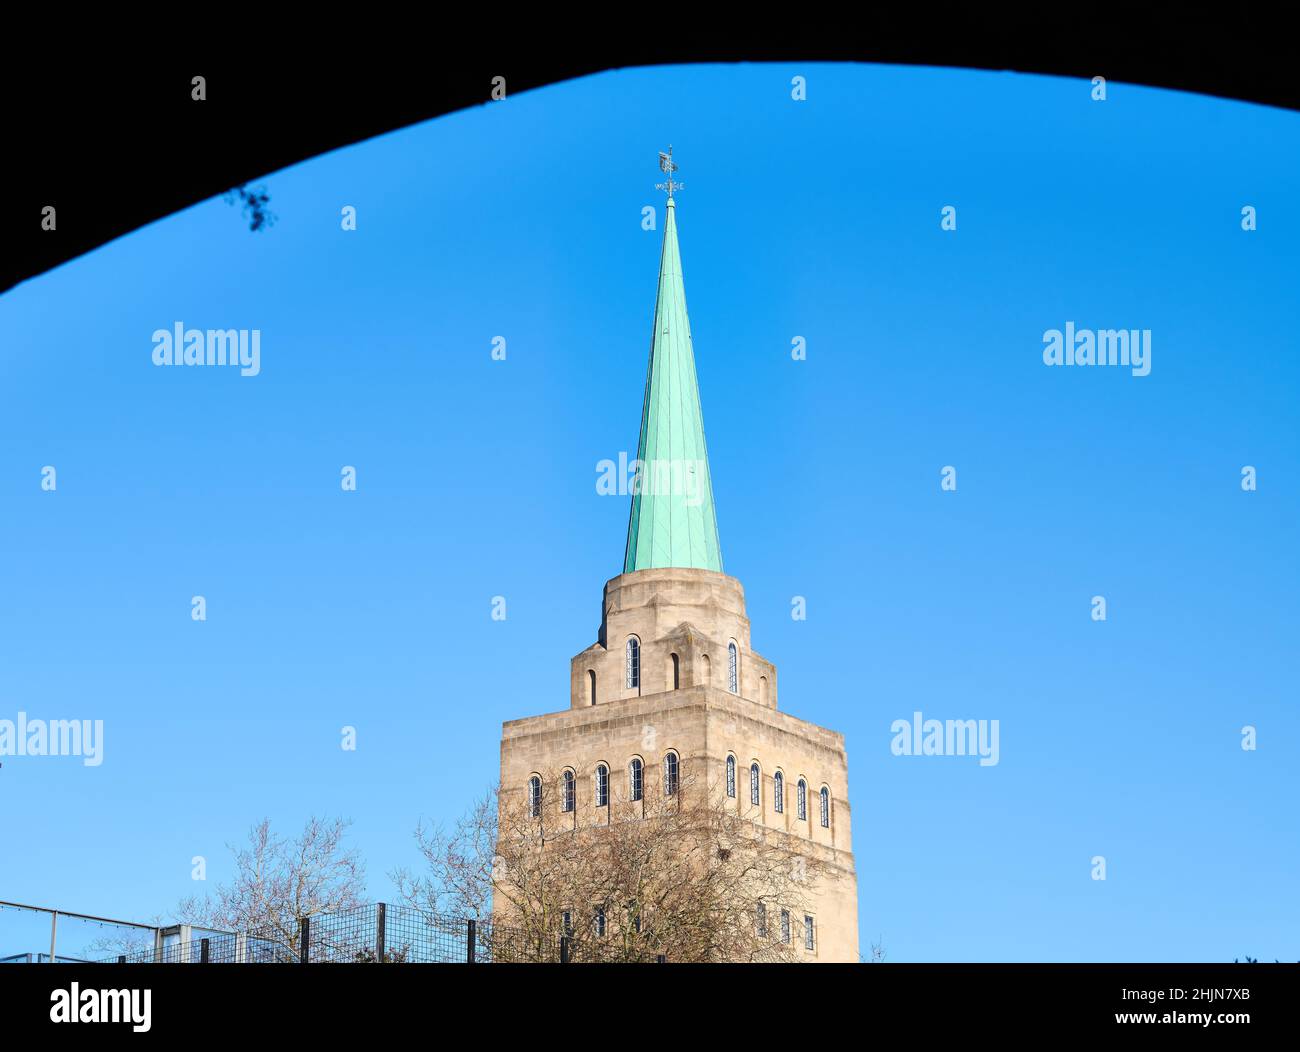 Steeple above the tower at Nuffield college, university of Oxford, England. Stock Photo